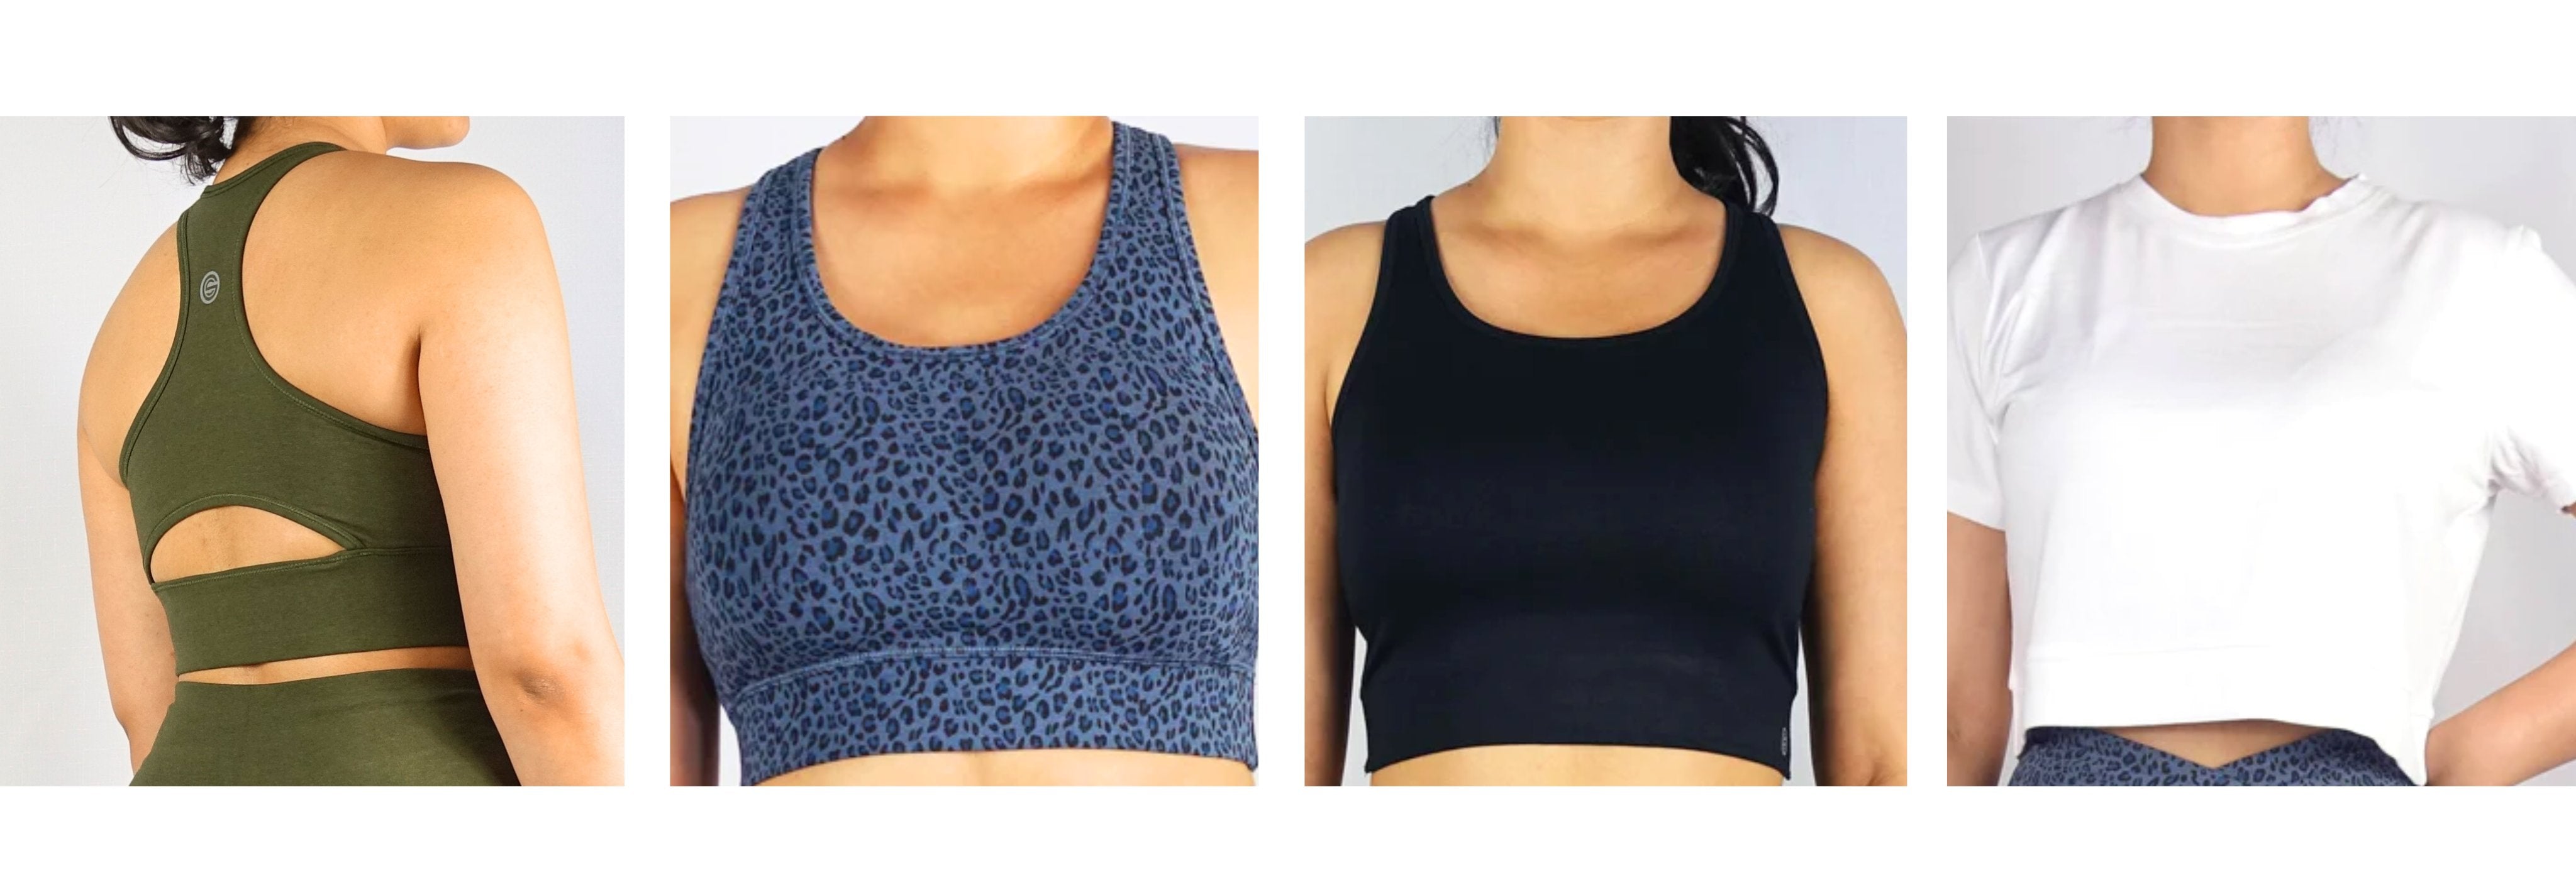 Super Soft Tops & Sports Bra Breathable Bamboo & Moisture Wicking